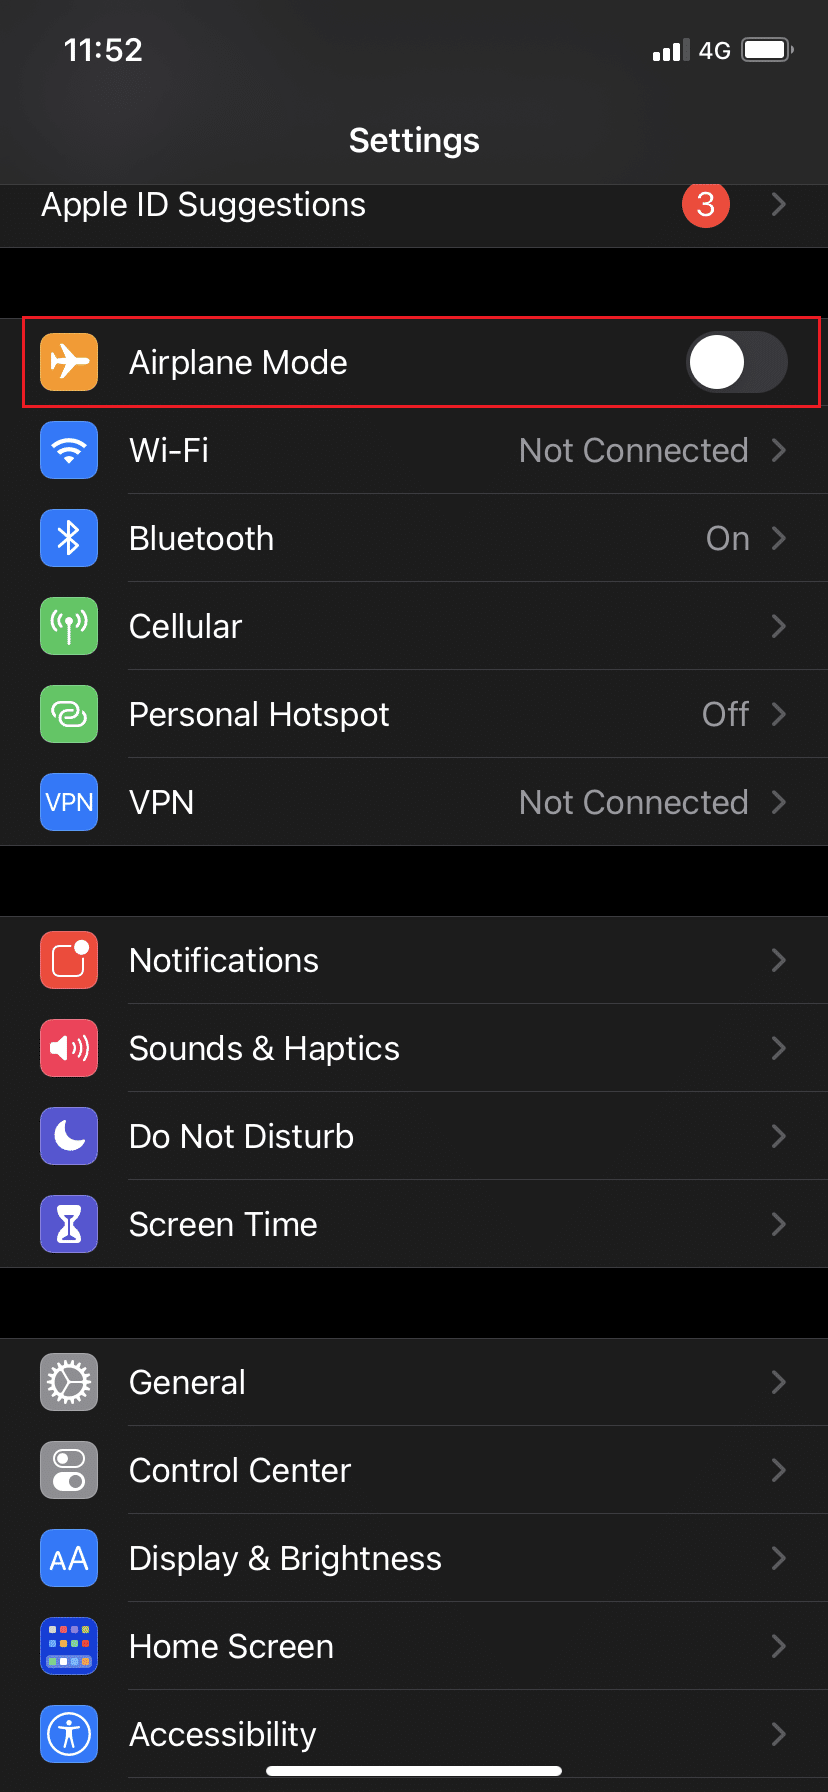 Toggle ON Airplane Mode to turn it on. Fix Apple CarPlay not working